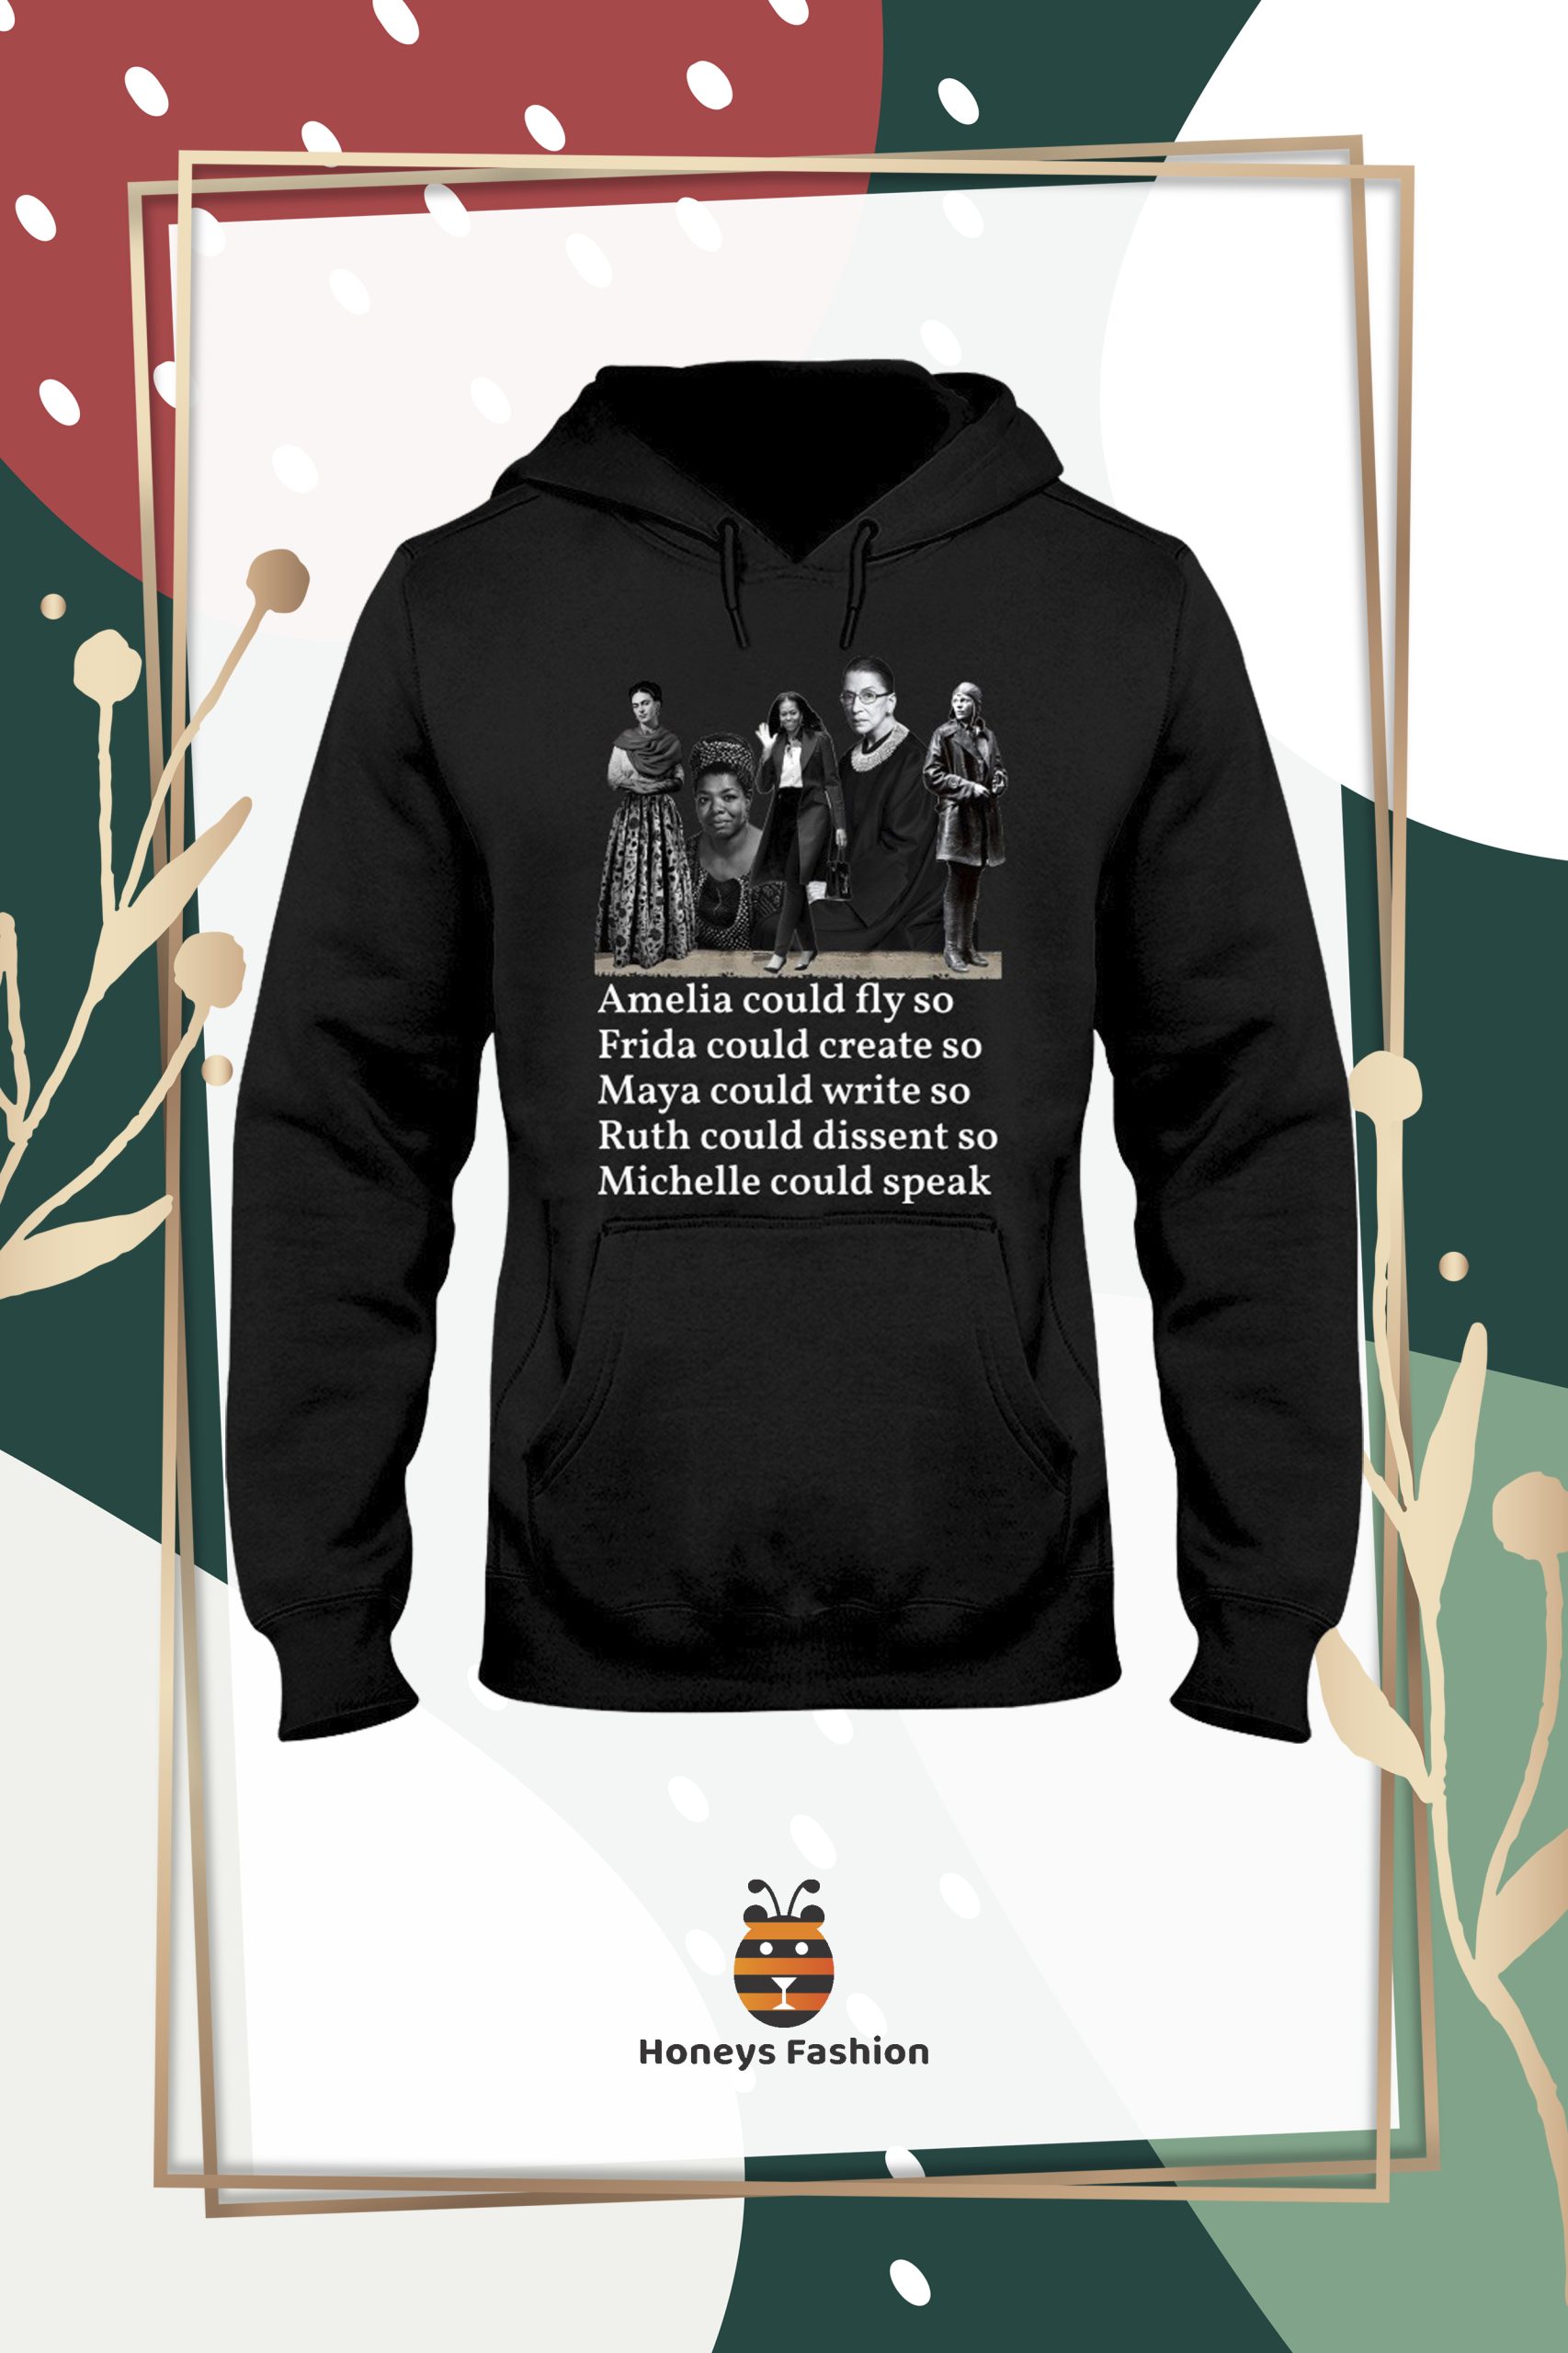 Black Feminist Amelia could fly so Frida could Create so shirt hoodie